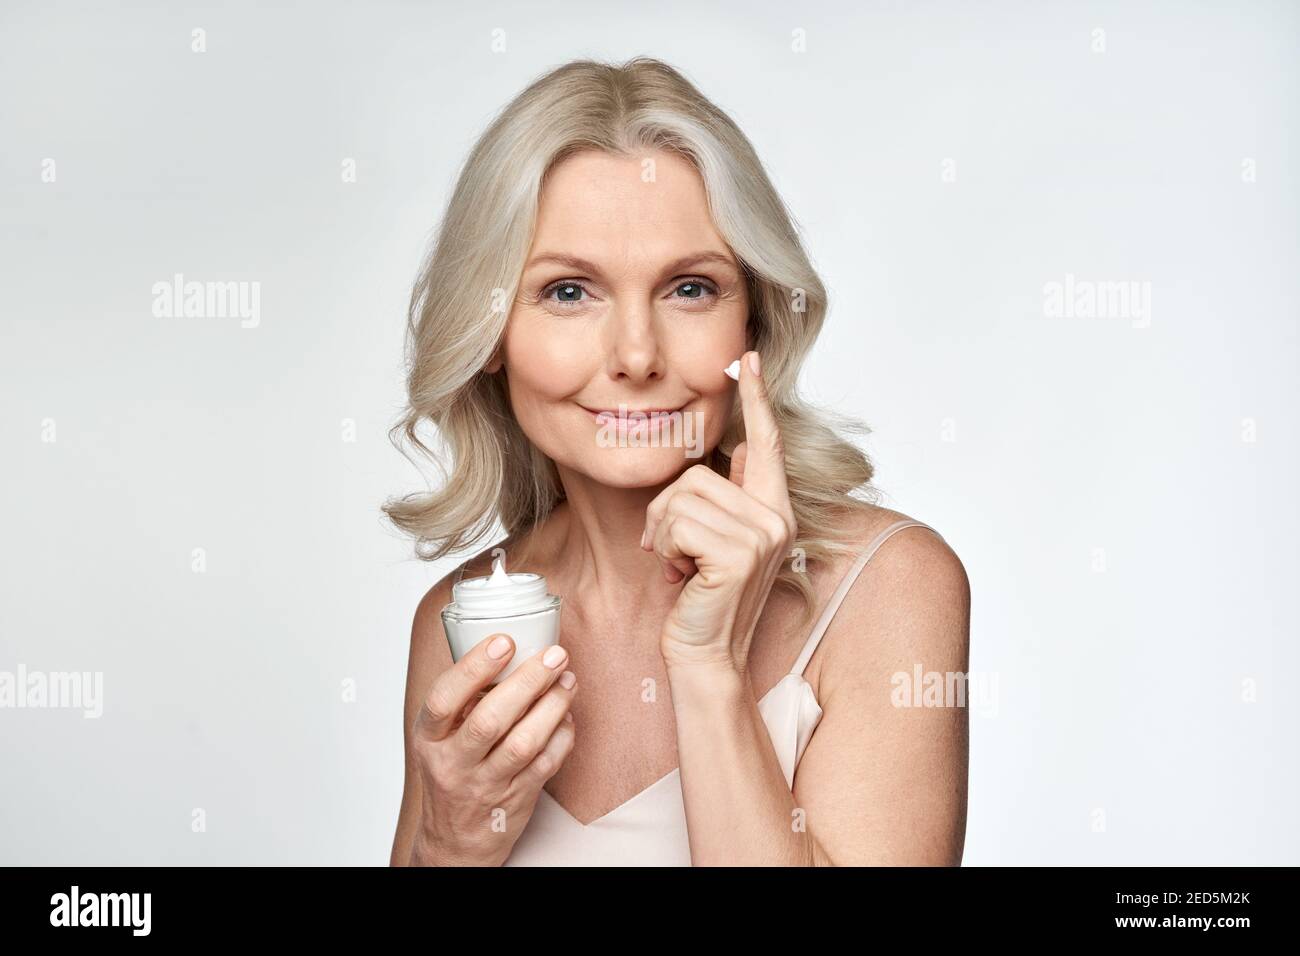 Smiling 50s middle aged woman putting facial cream on face looking at camera. Stock Photo